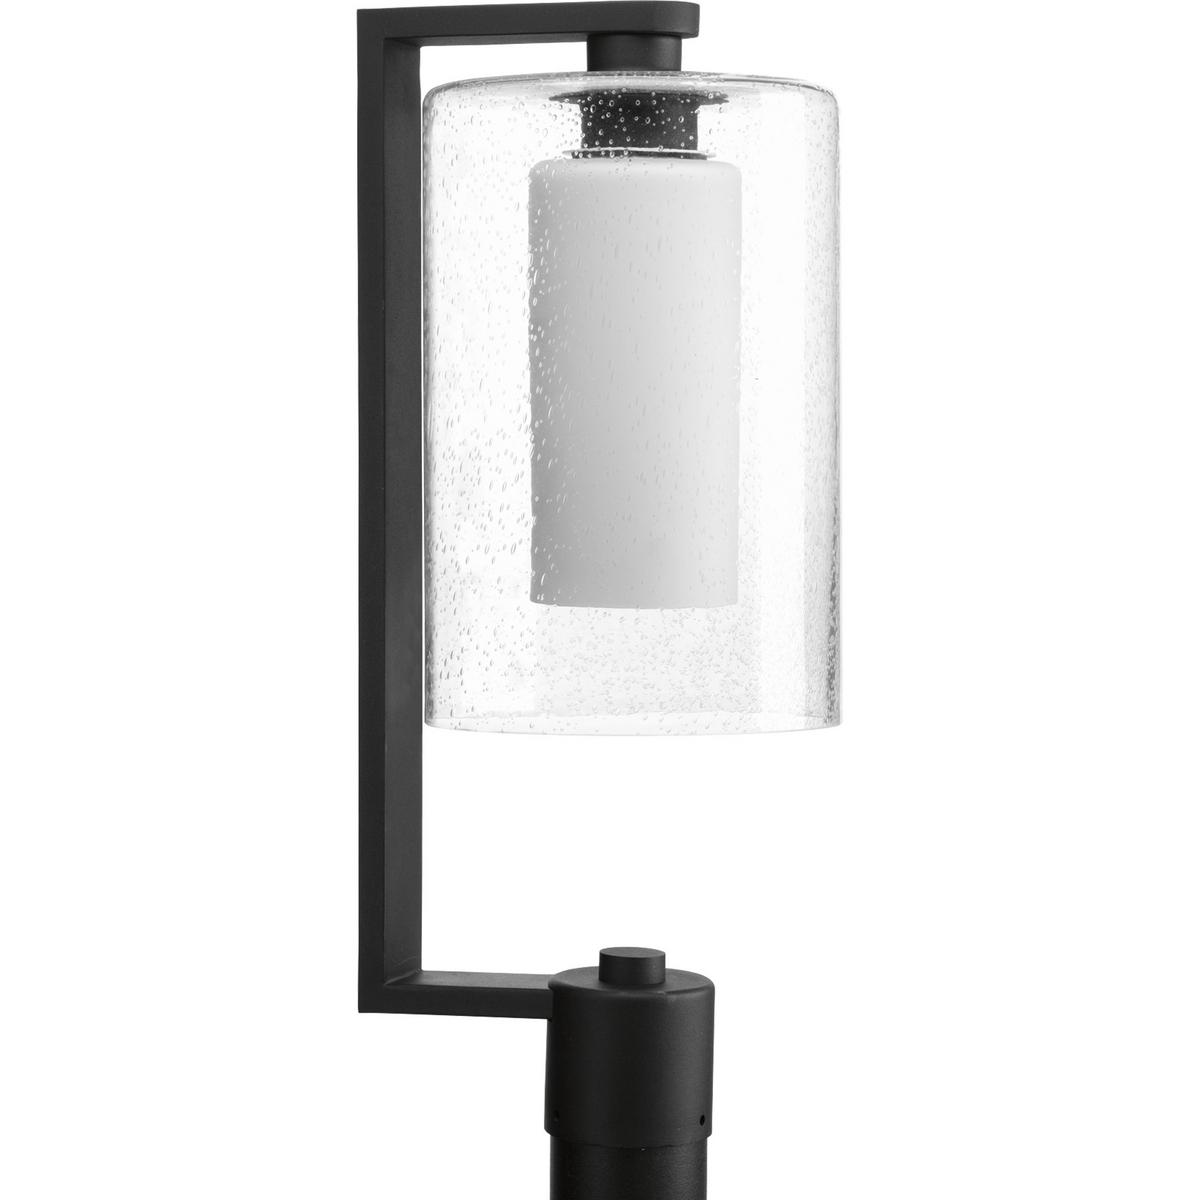 Hubbell P6420-31 Outdoor lighting adds both beauty and enhances the safety of your home or property. Compel is our new outdoor collection featuring modern forms and layered glass. Etched opal glass within a seeded glass shade offers individuals design flexibility, as fixt